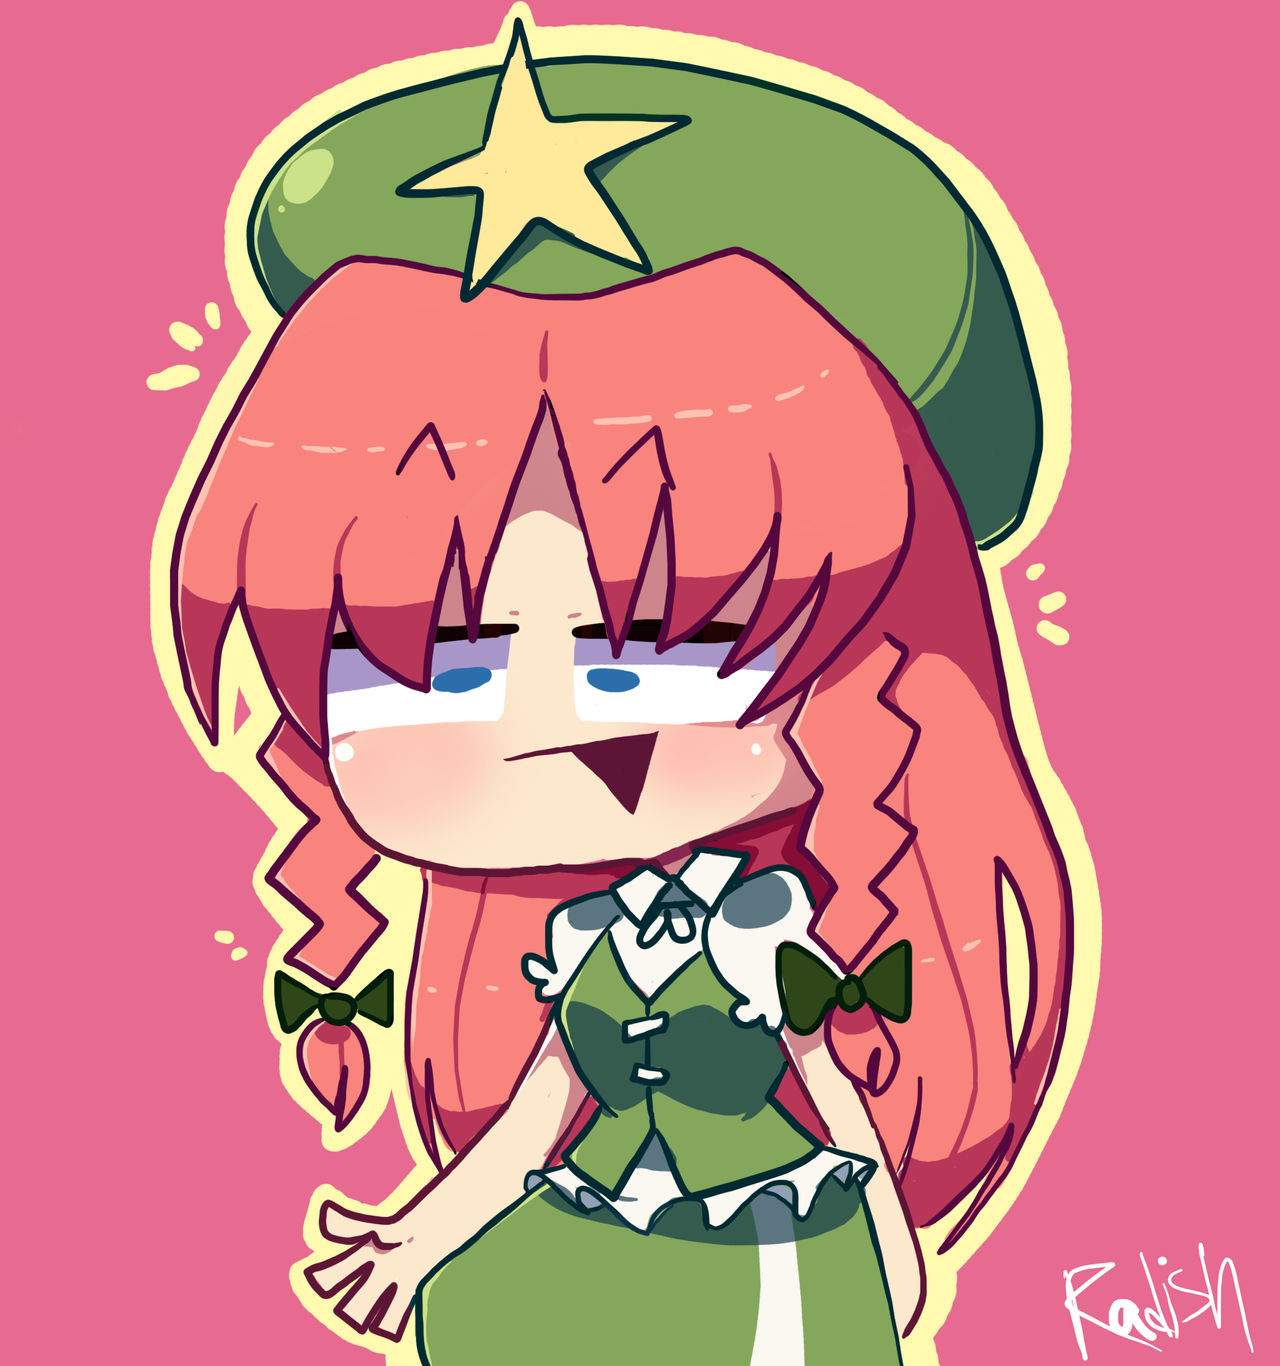 Hong Meiling by TheDerpyPro on DeviantArt